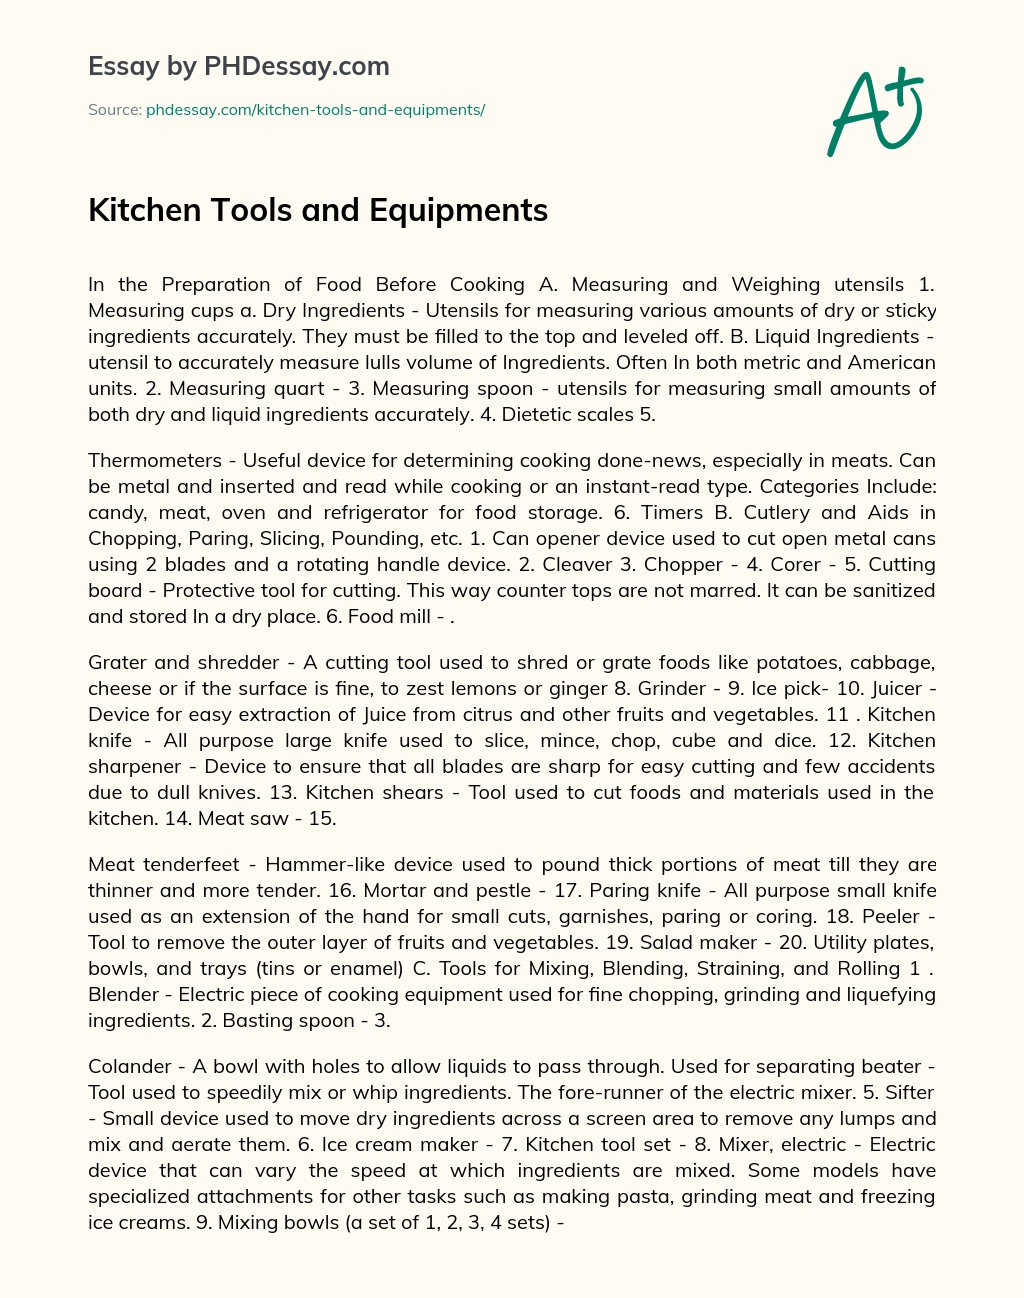 Kitchen Tools and Equipments essay